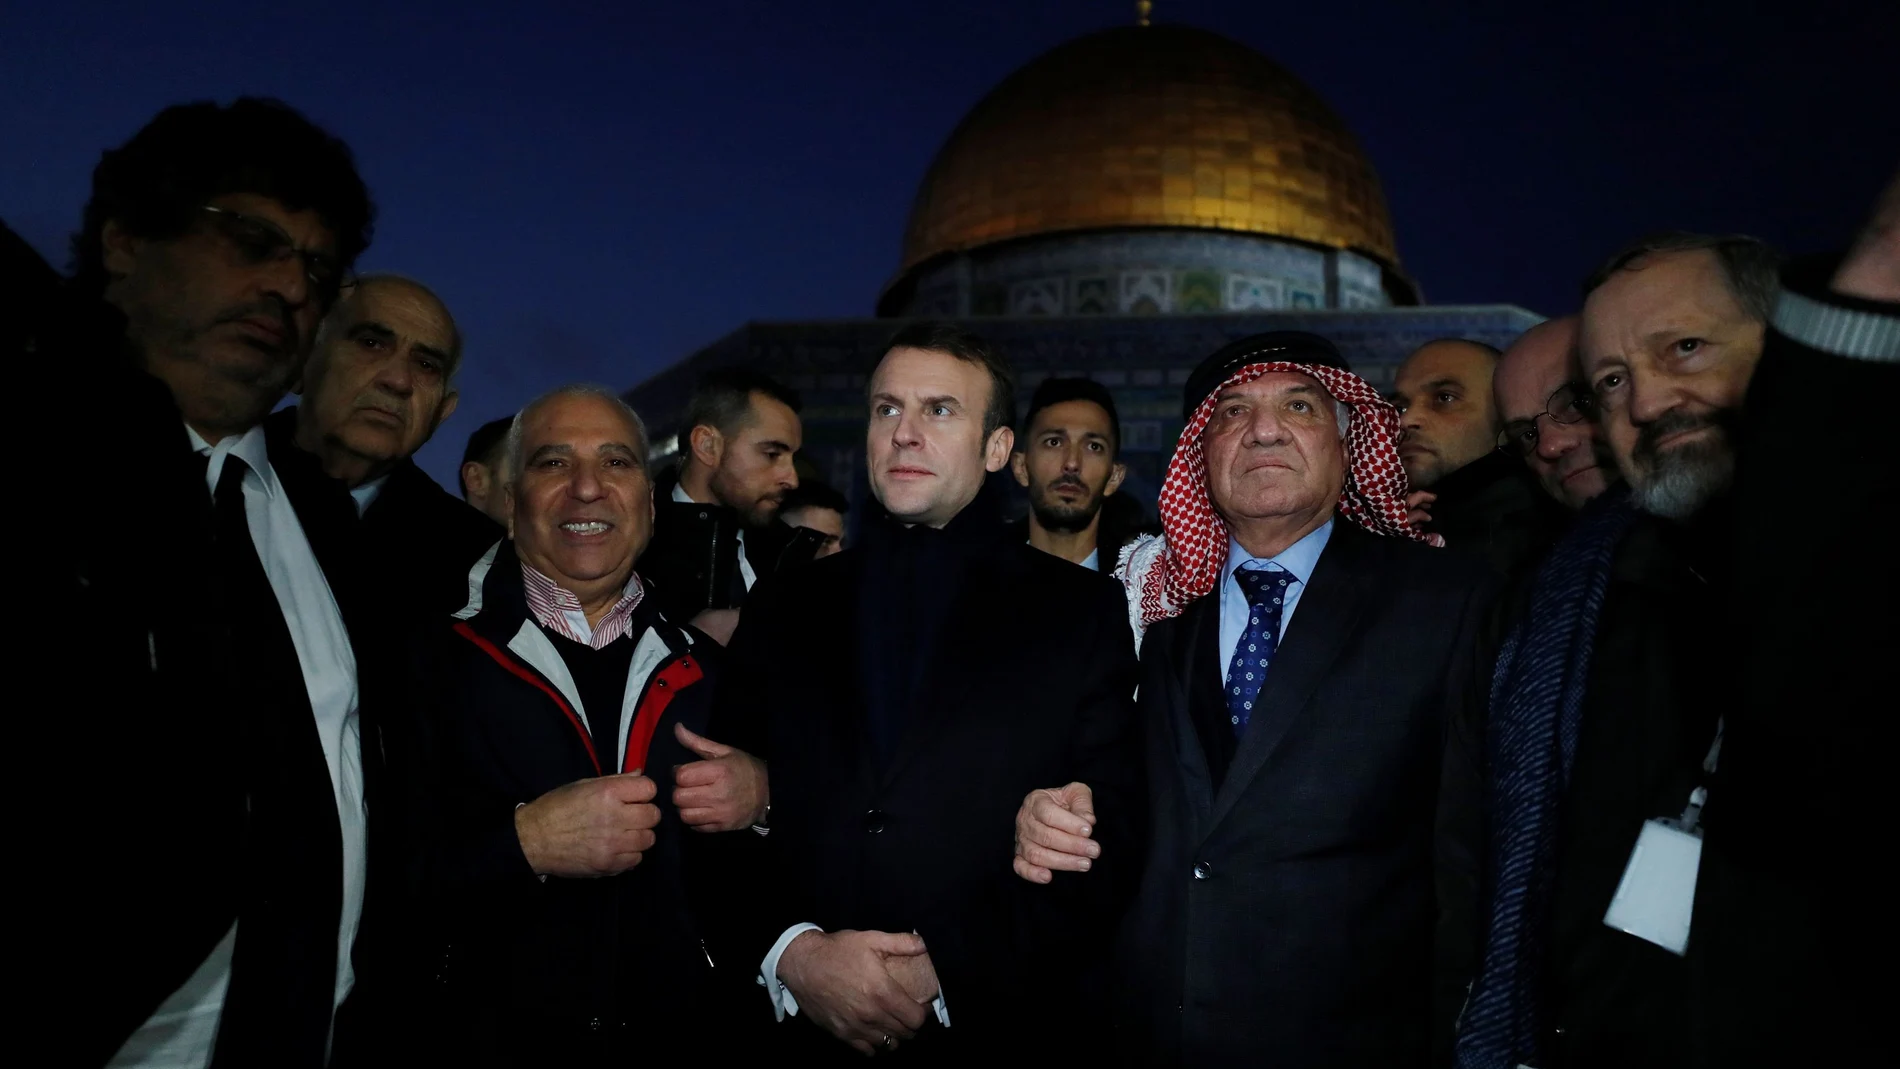 The Dome of the Rock is seen in the background as French President Emmanuel Macron visits the compound housing al-Aqsa mosque known to Muslims as Noble Sanctuary and to Jews as Temple Mount, in Jerusalem's Old City